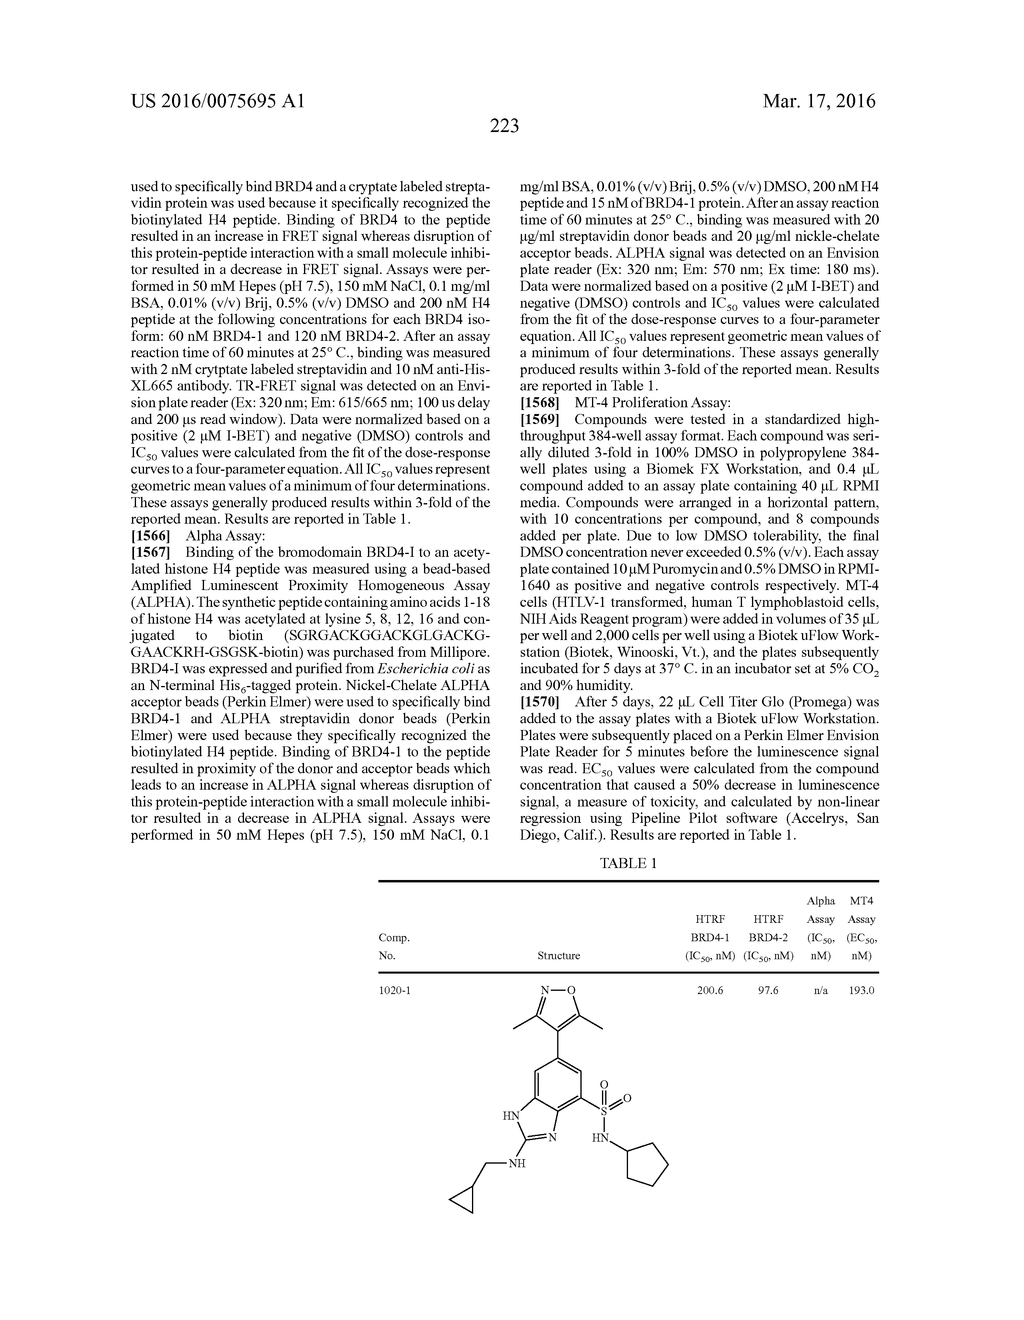 BENZIMIDAZOLE DERIVATIVES AS BROMODOMAIN INHIBITORS - diagram, schematic, and image 228